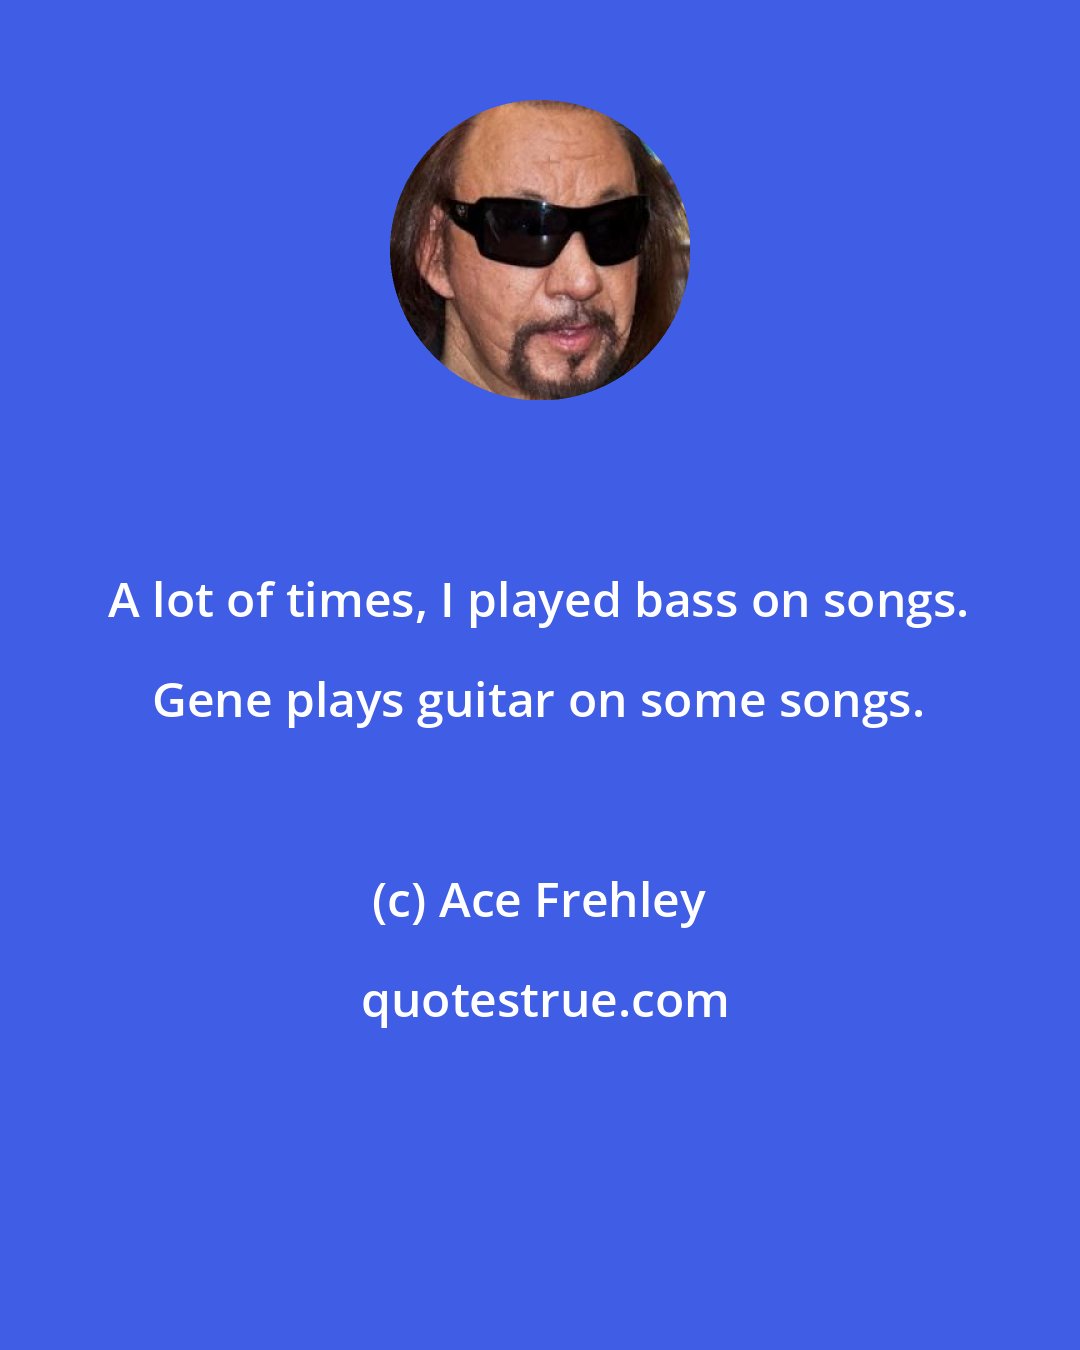 Ace Frehley: A lot of times, I played bass on songs. Gene plays guitar on some songs.